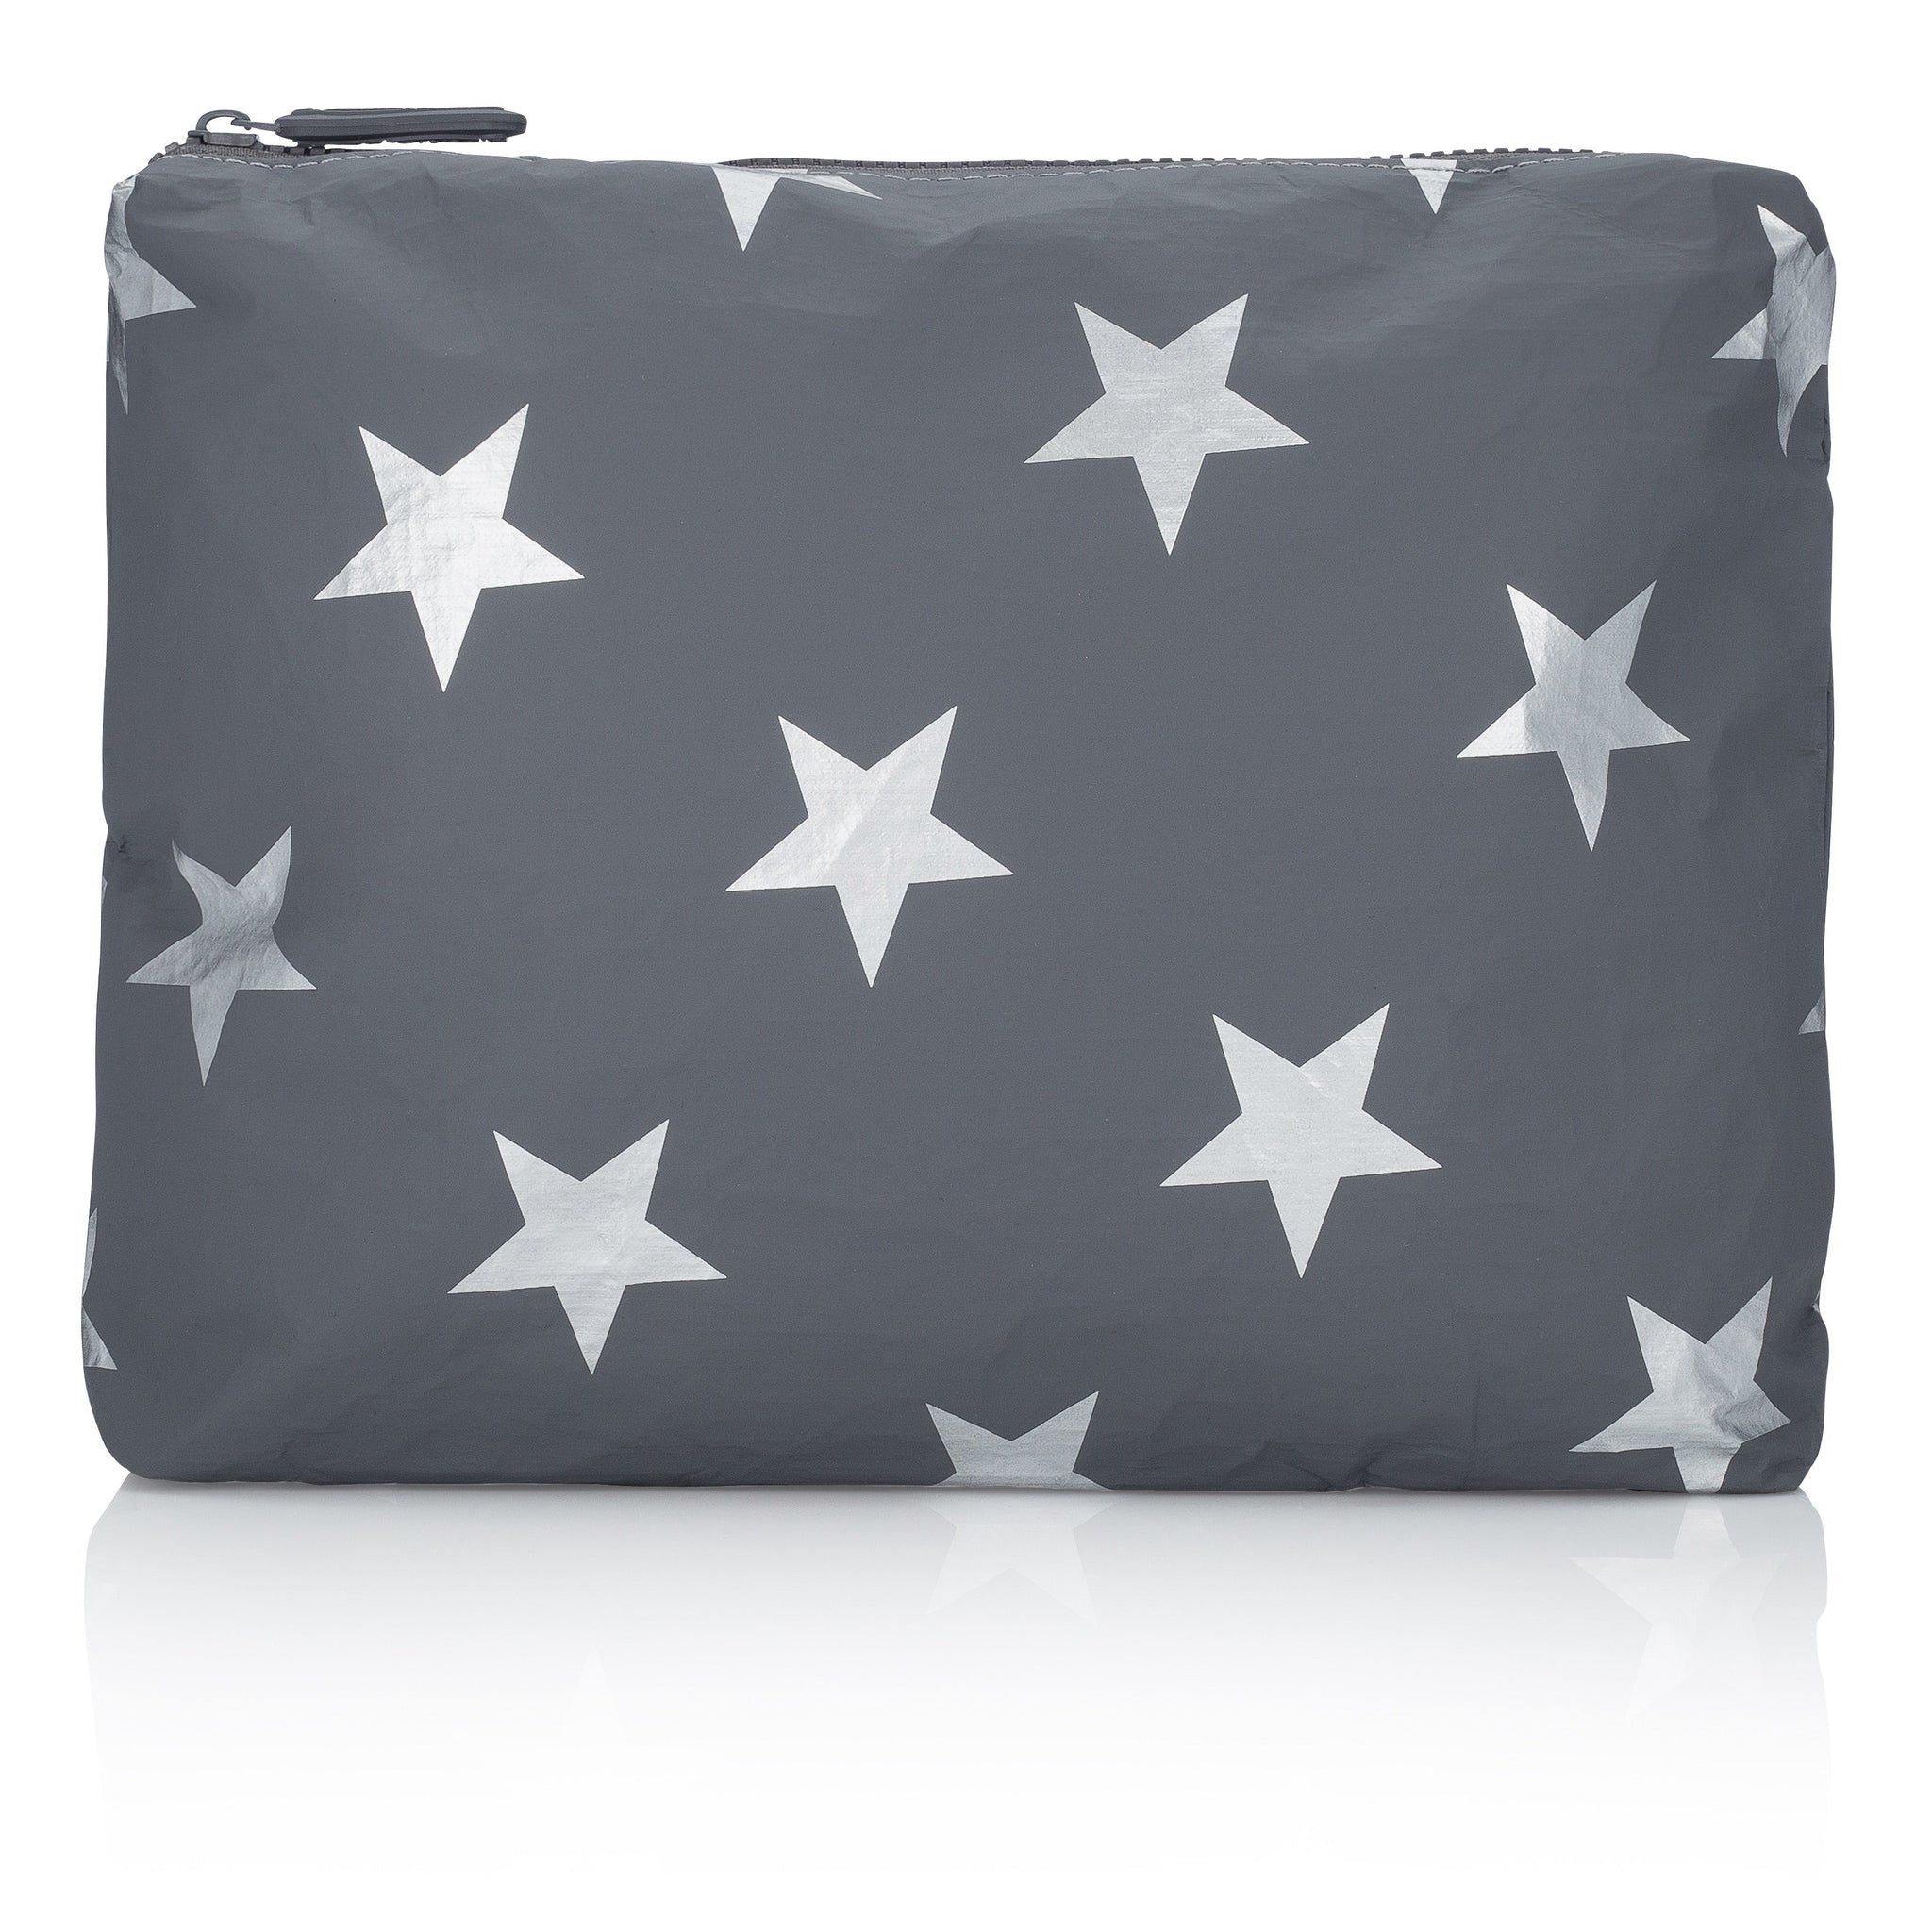 Travel Pack - Makeup Pouch - Medium Pack - Cool Gray with Metallic Silver Stars